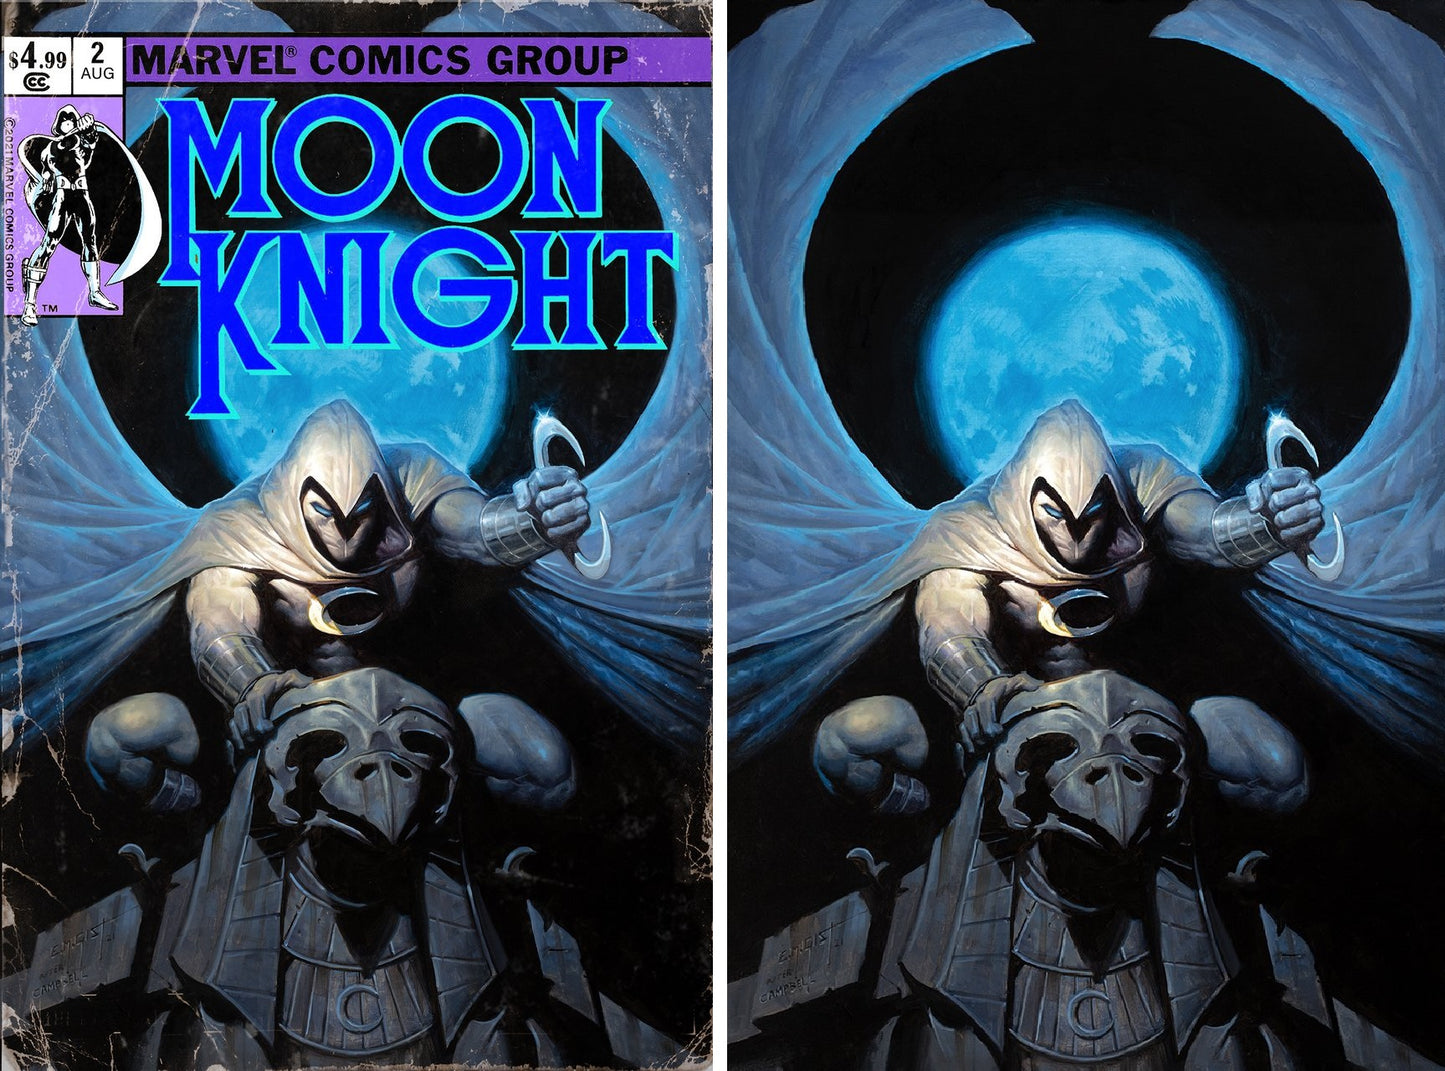 MOON KNIGHT #2 E.M GIST TRADE/VIRGIN VARIANT SET LIMITED TO 400 SETS WITH NUMBERED COA & TRADING CARD COA